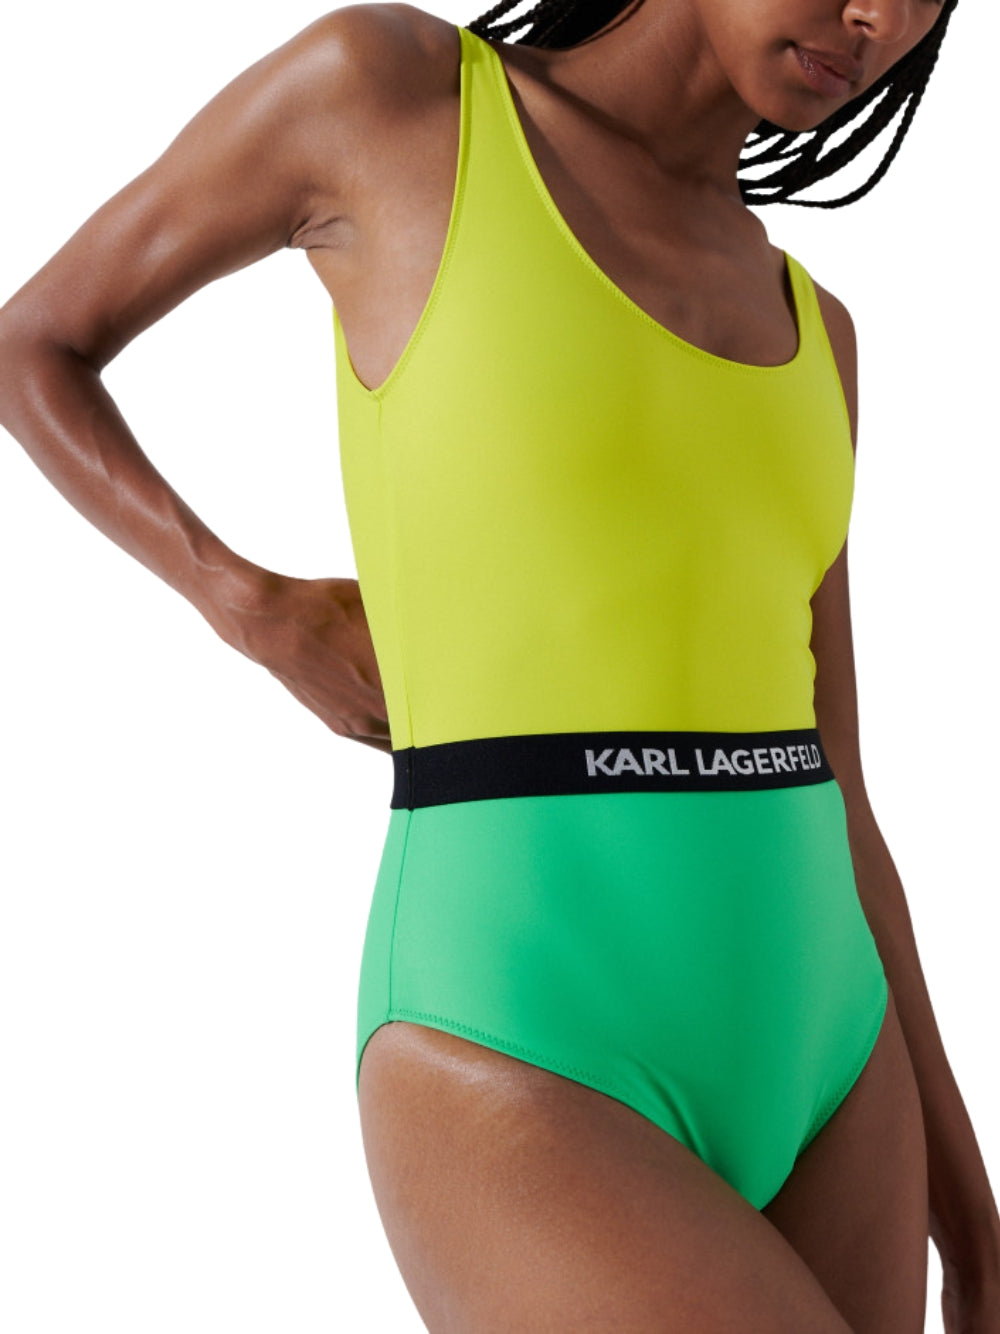 Karl Lagerfeld swimsuits